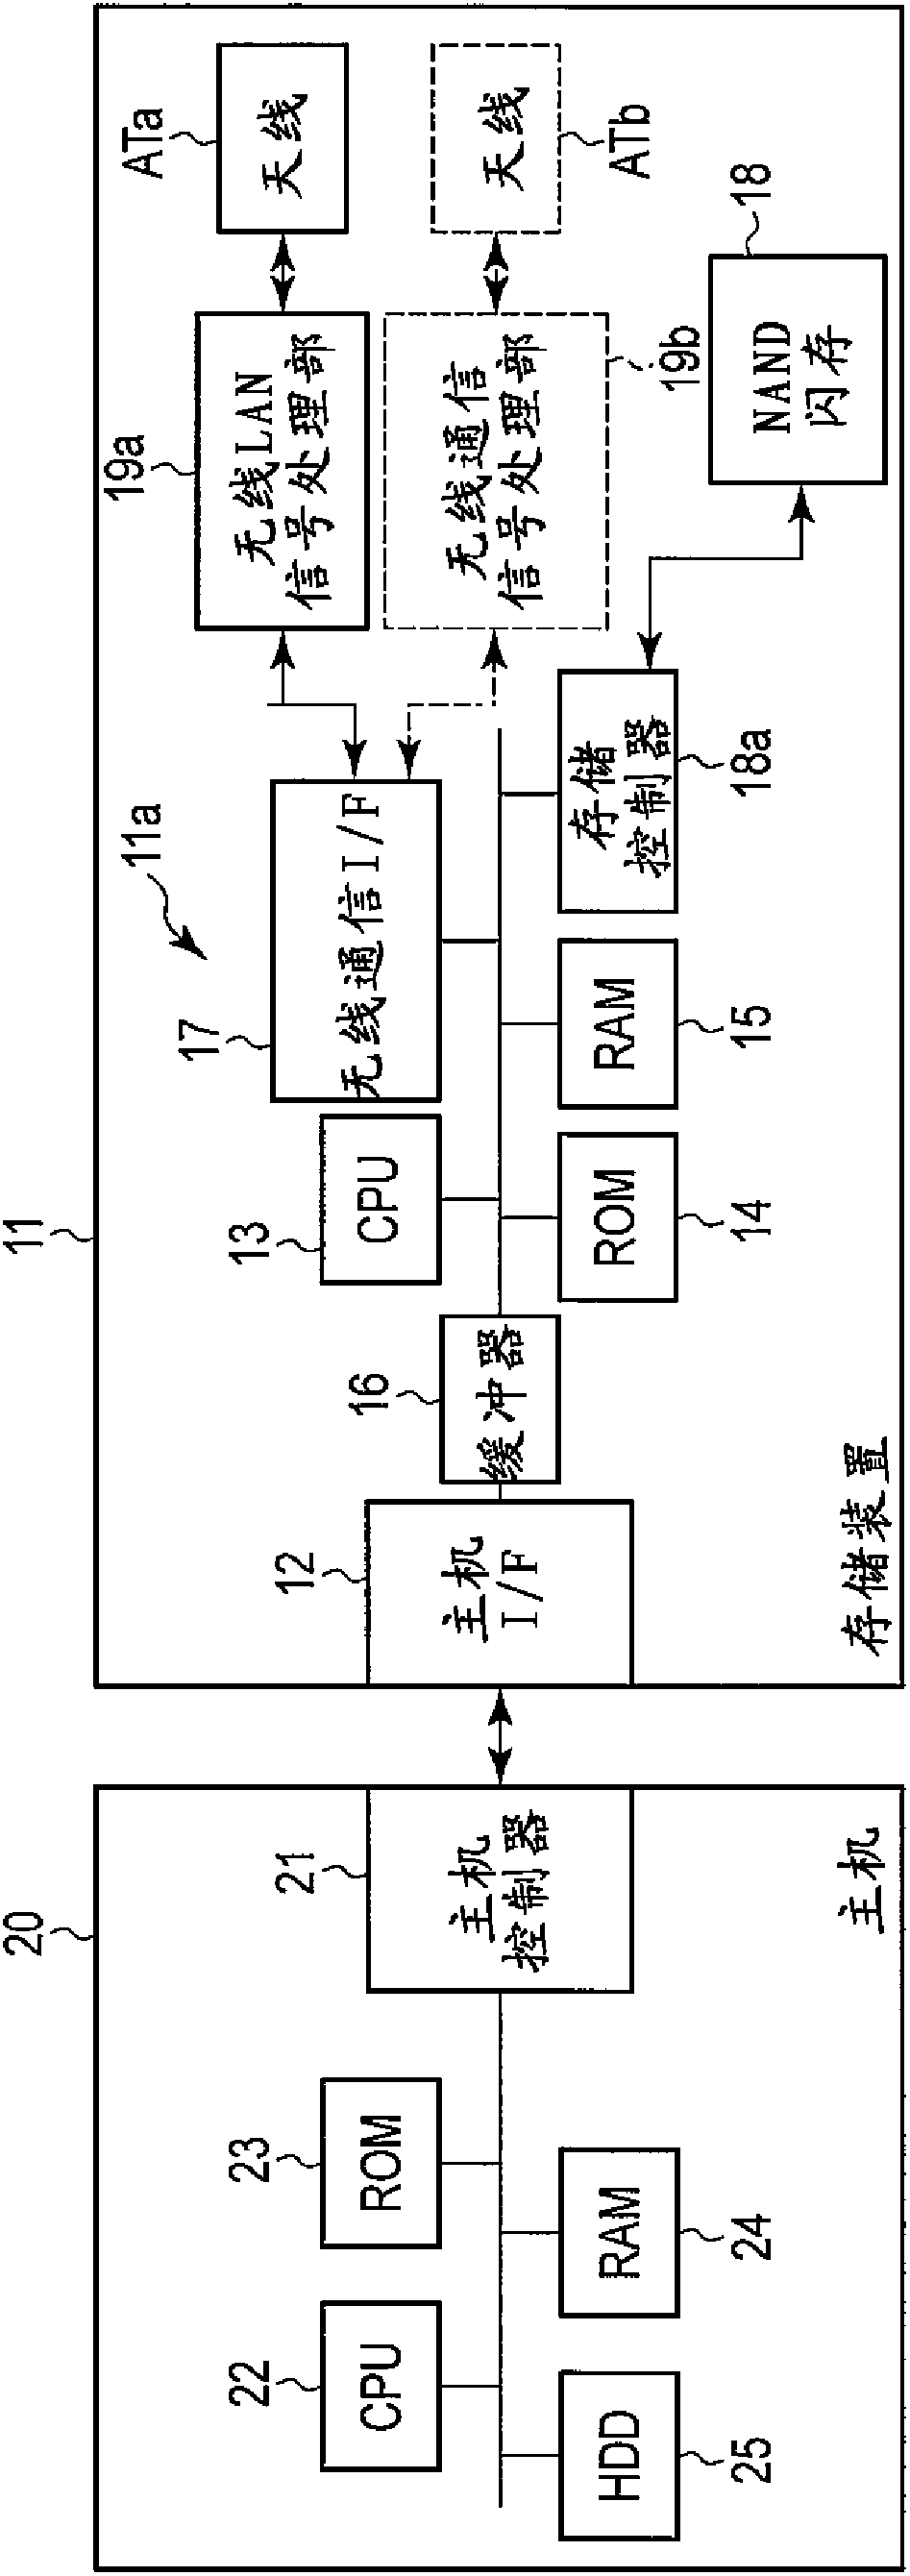 Memory system capable of prohibiting access to application software and system software